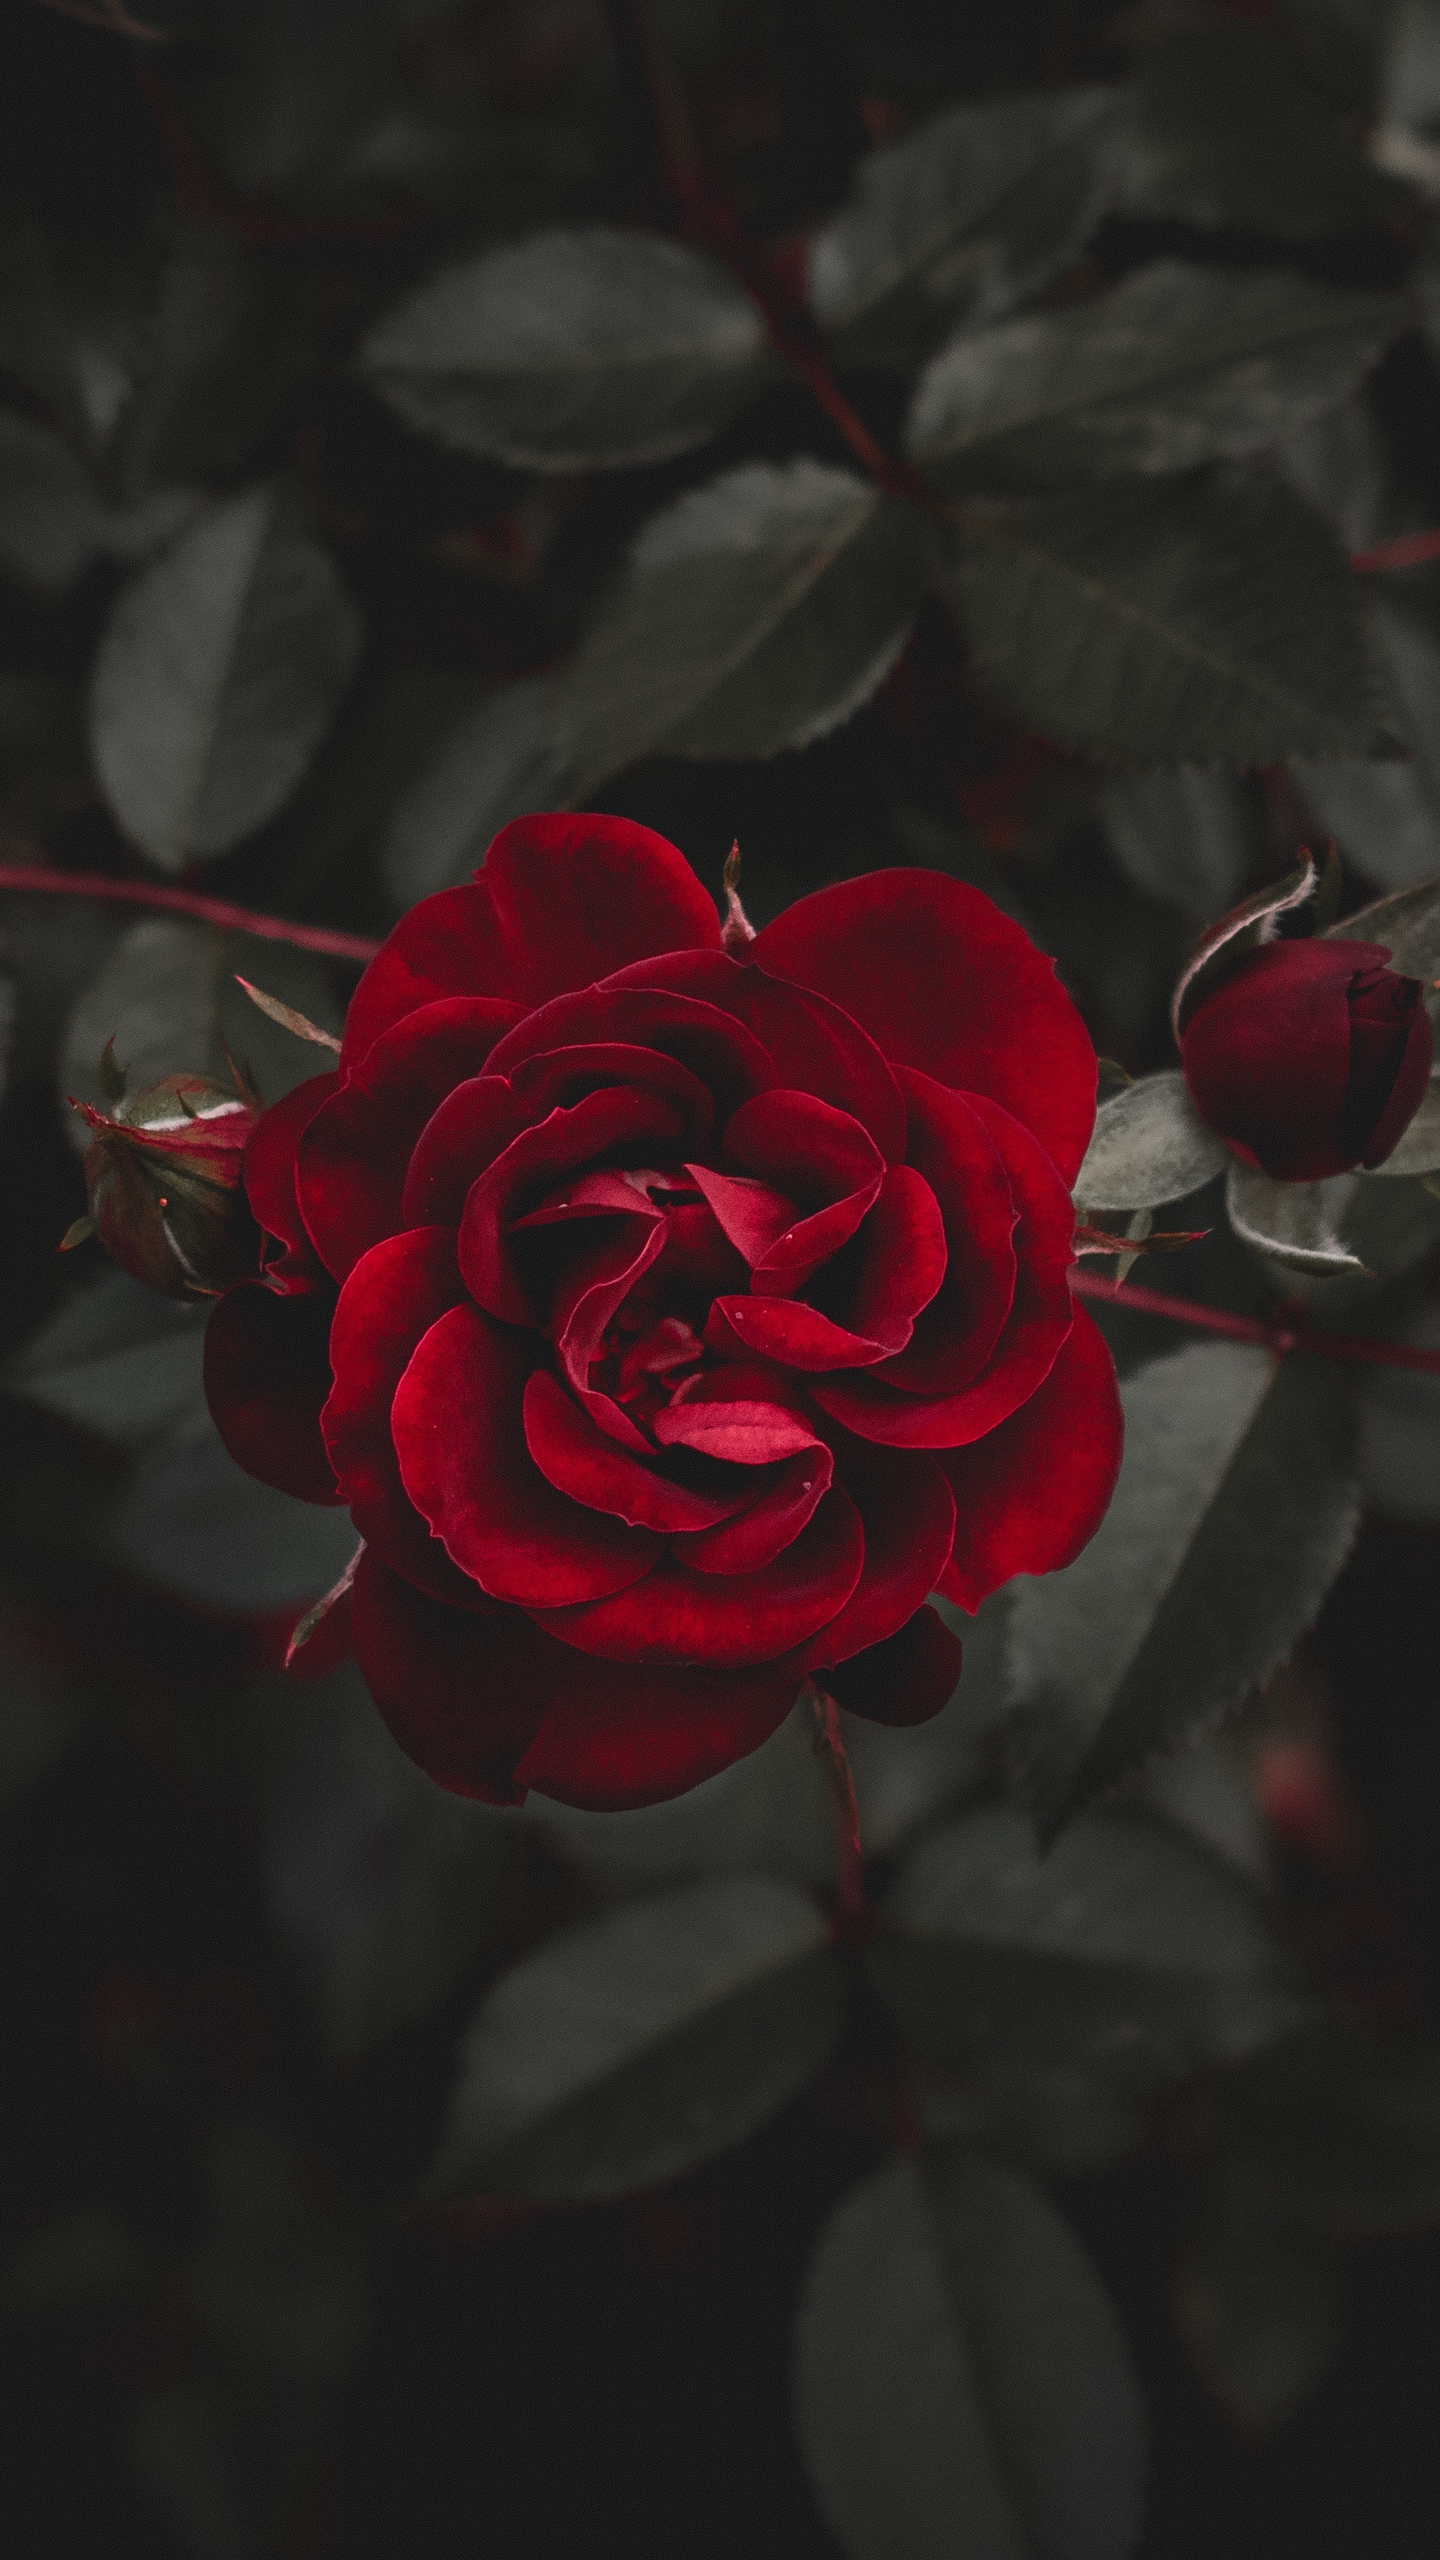 Wallpaper Rose, Red, Flower, Bud - Red Flower Background Iphone - HD Wallpaper 